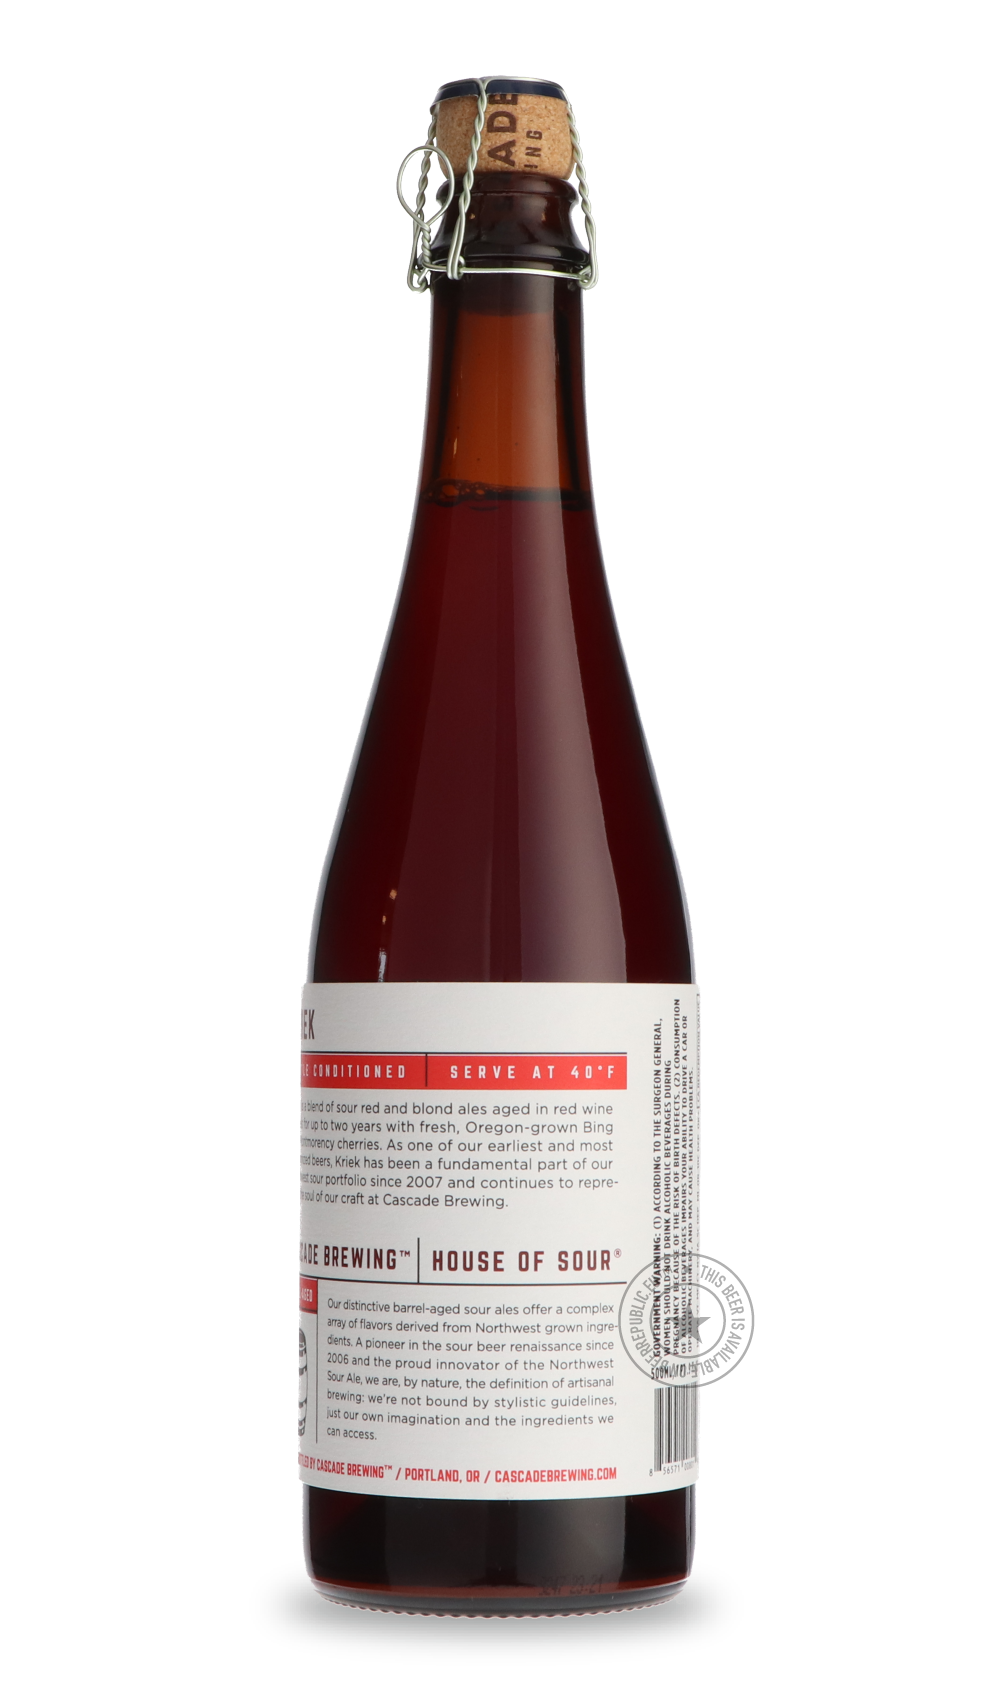 -Cascade- Kriek-Sour / Wild & Fruity- Only @ Beer Republic - The best online beer store for American & Canadian craft beer - Buy beer online from the USA and Canada - Bier online kopen - Amerikaans bier kopen - Craft beer store - Craft beer kopen - Amerikanisch bier kaufen - Bier online kaufen - Acheter biere online - IPA - Stout - Porter - New England IPA - Hazy IPA - Imperial Stout - Barrel Aged - Barrel Aged Imperial Stout - Brown - Dark beer - Blond - Blonde - Pilsner - Lager - Wheat - Weizen - Amber - 